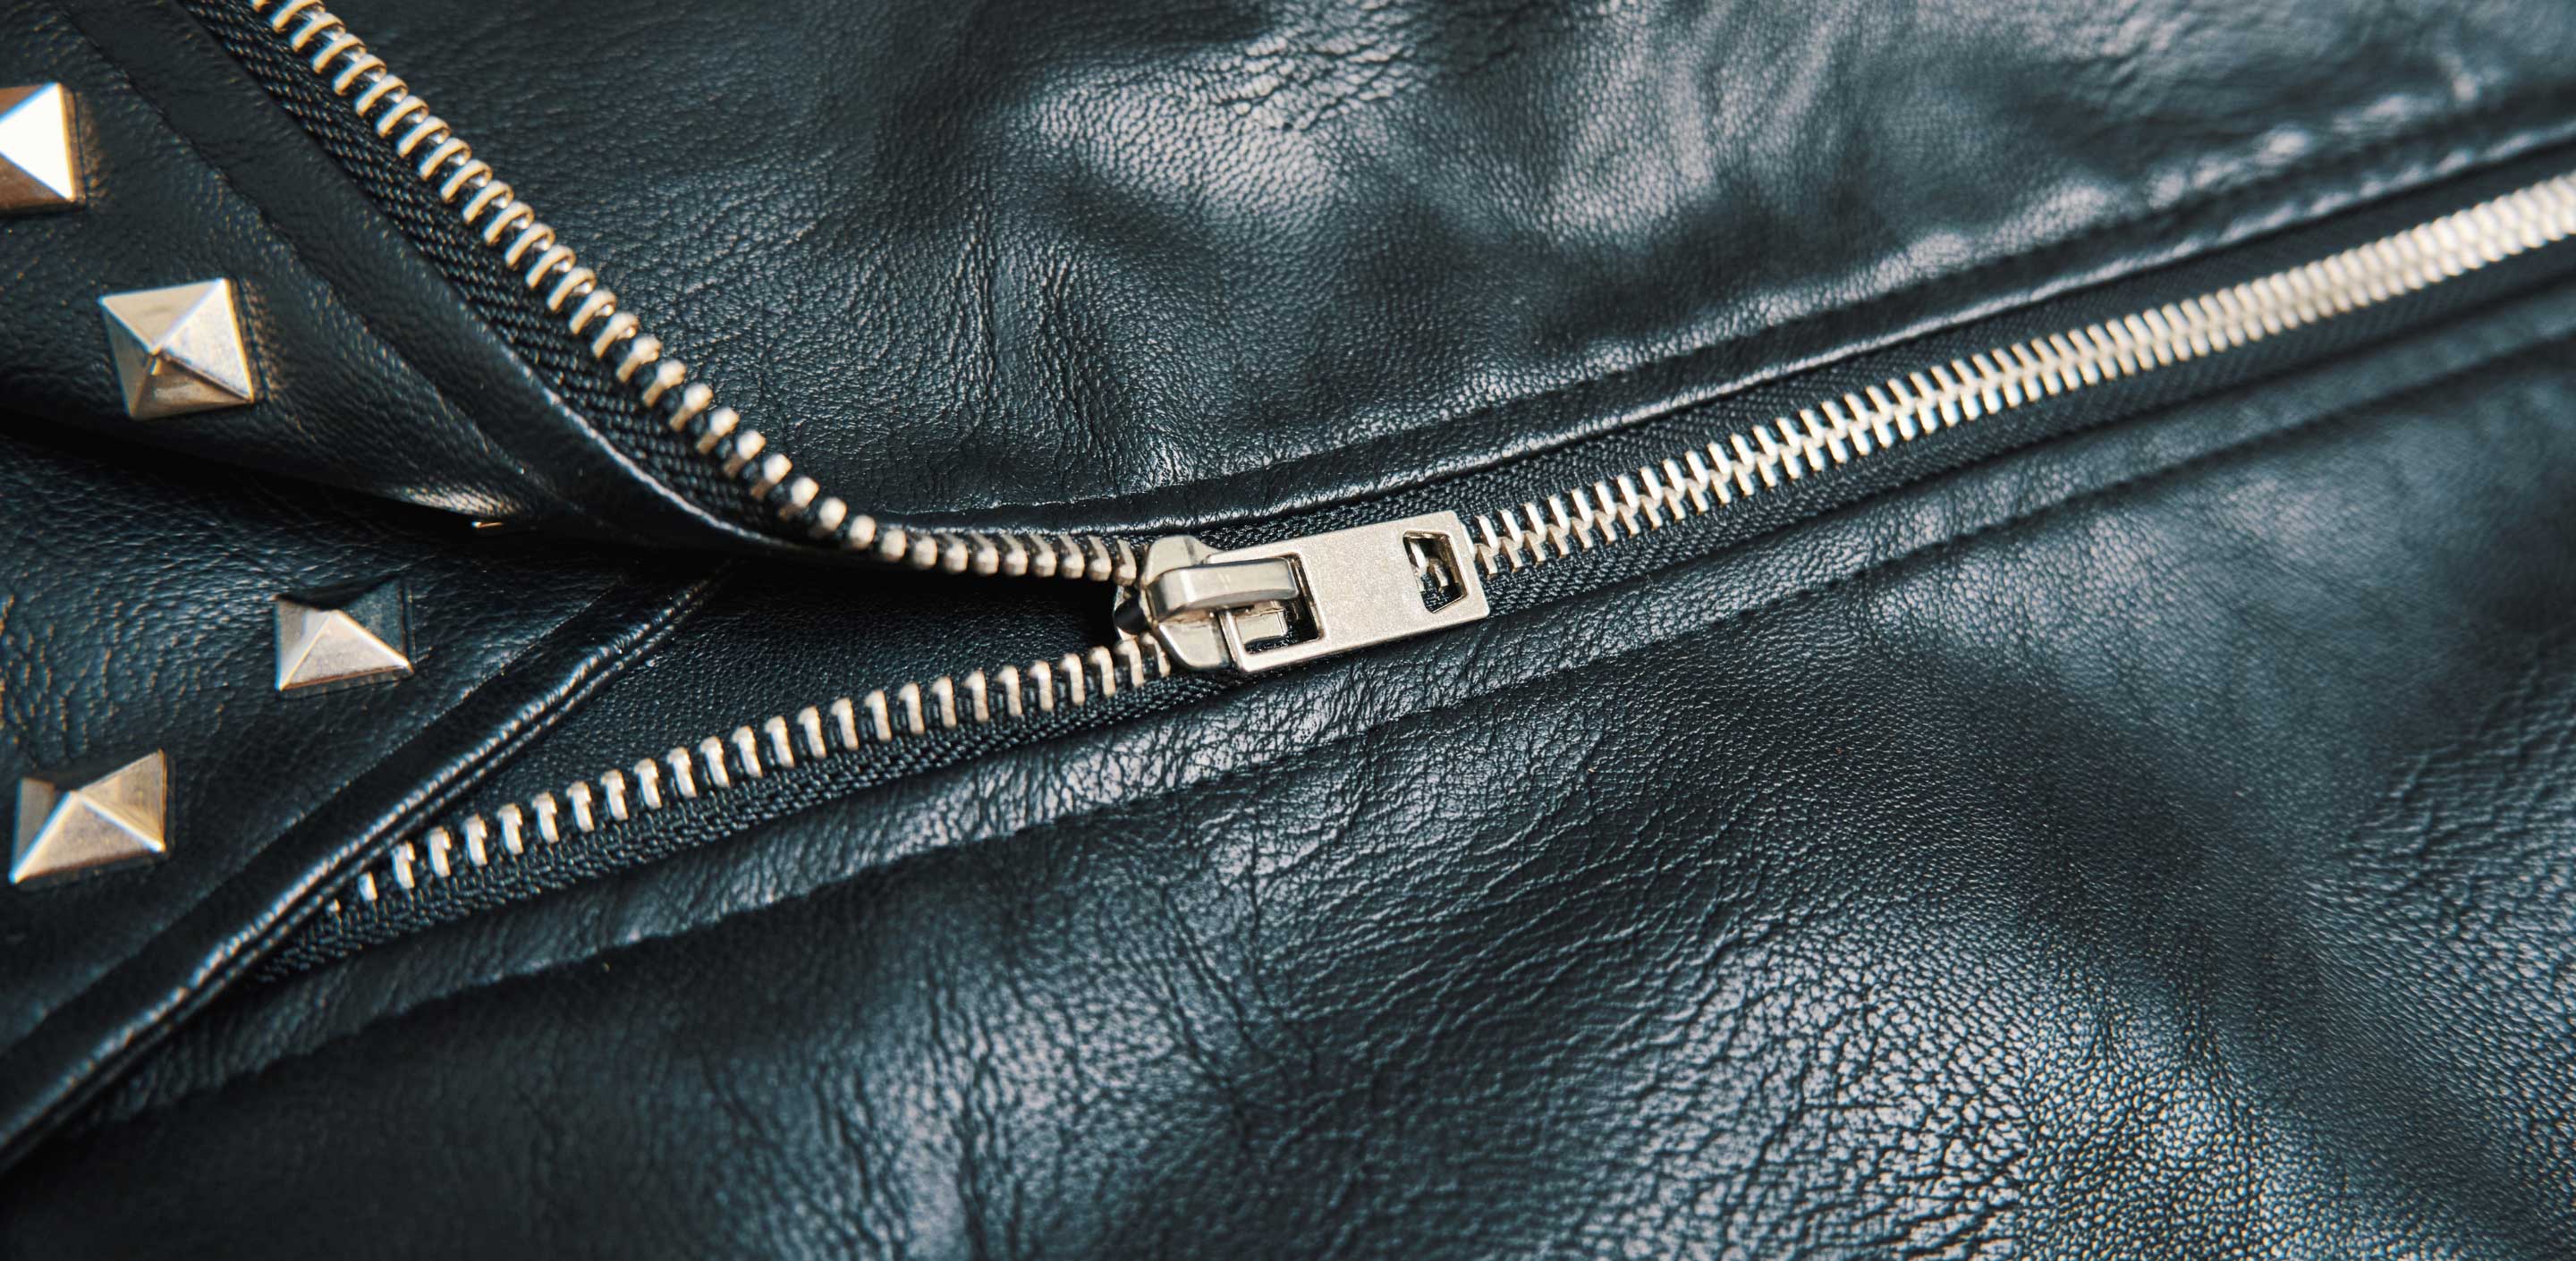 What is the longest-lasting leather